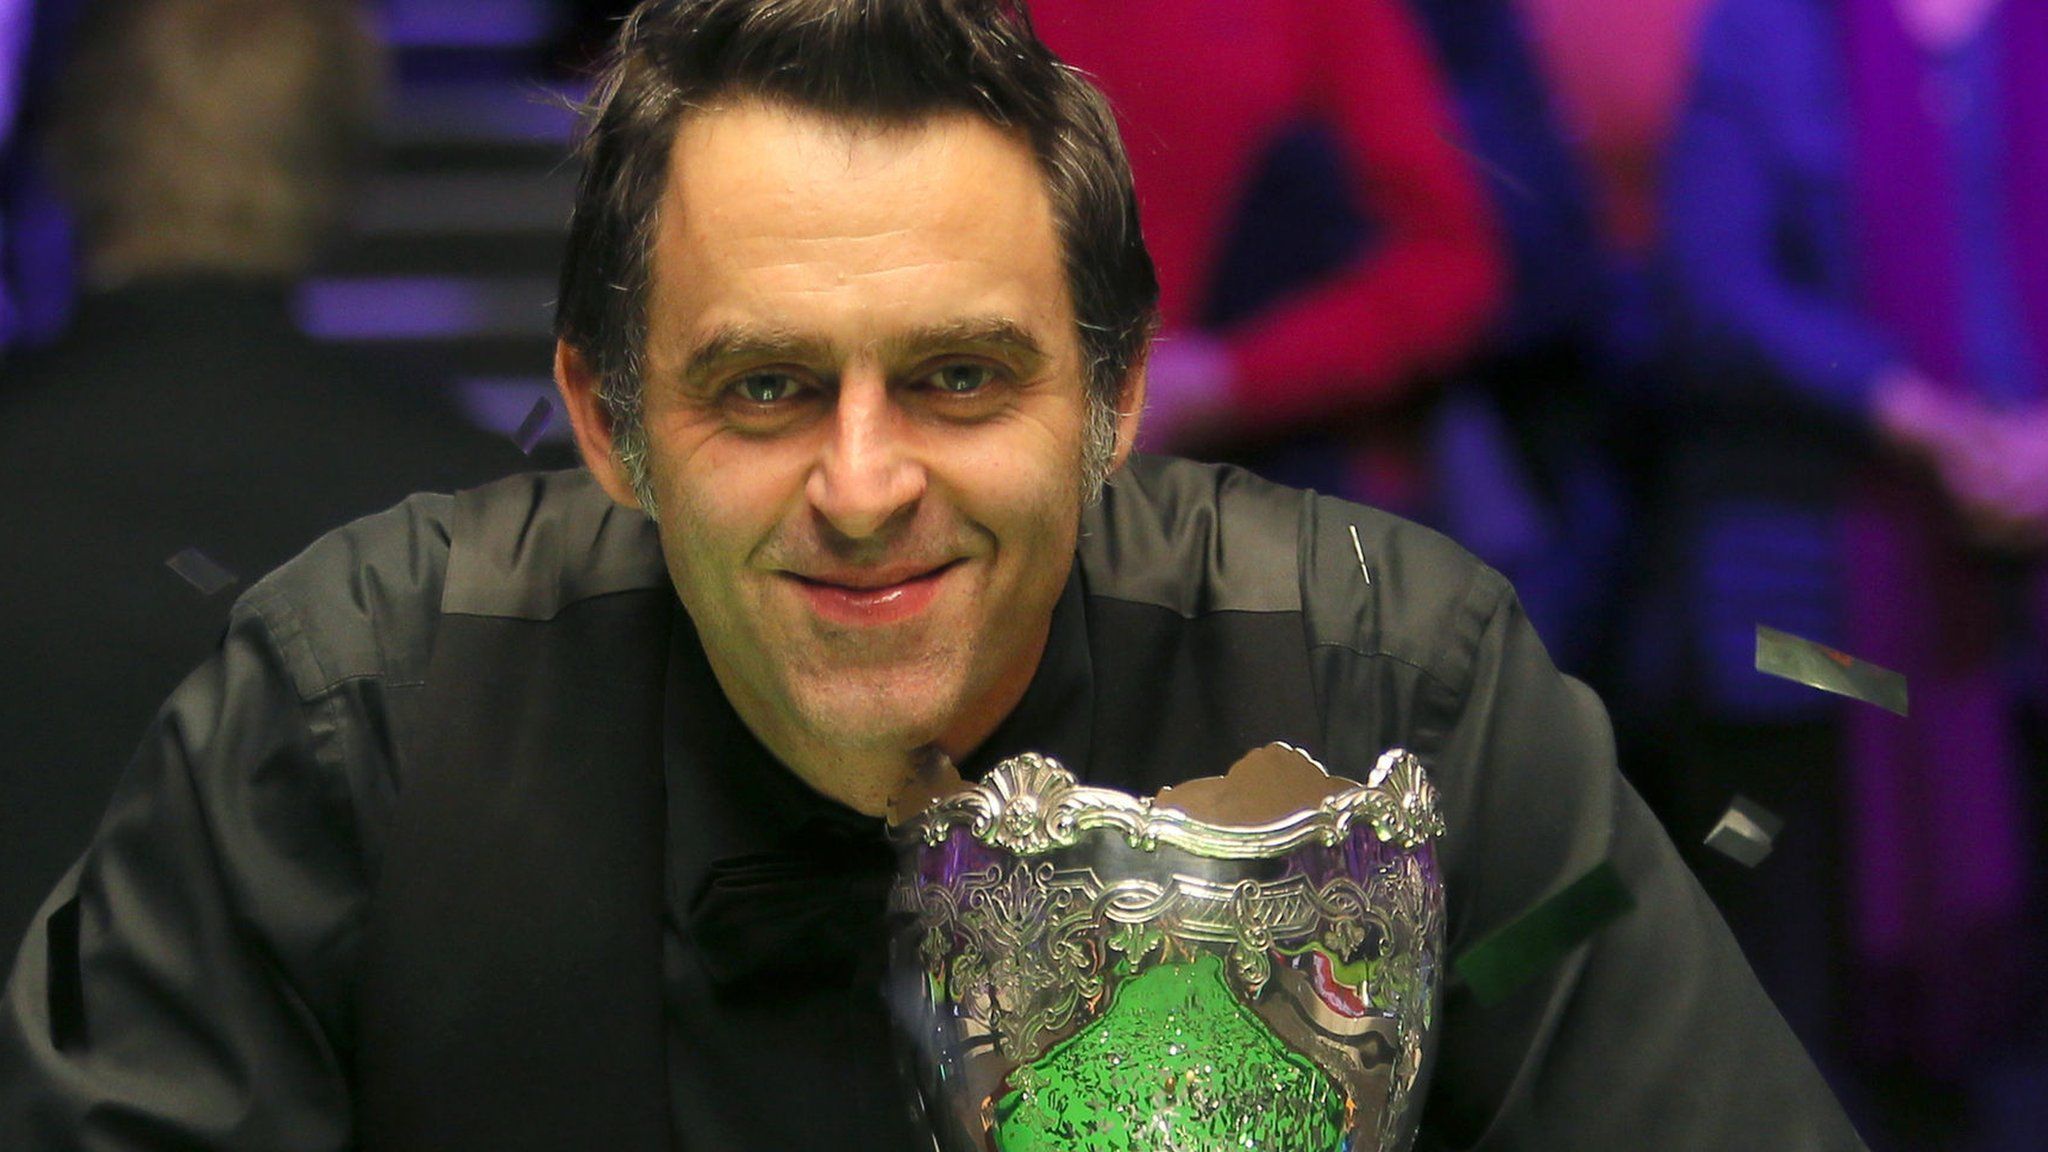 Ronnie O'Sullivan poses with the UK Championship trophy after beating Shaun Murphy in the final